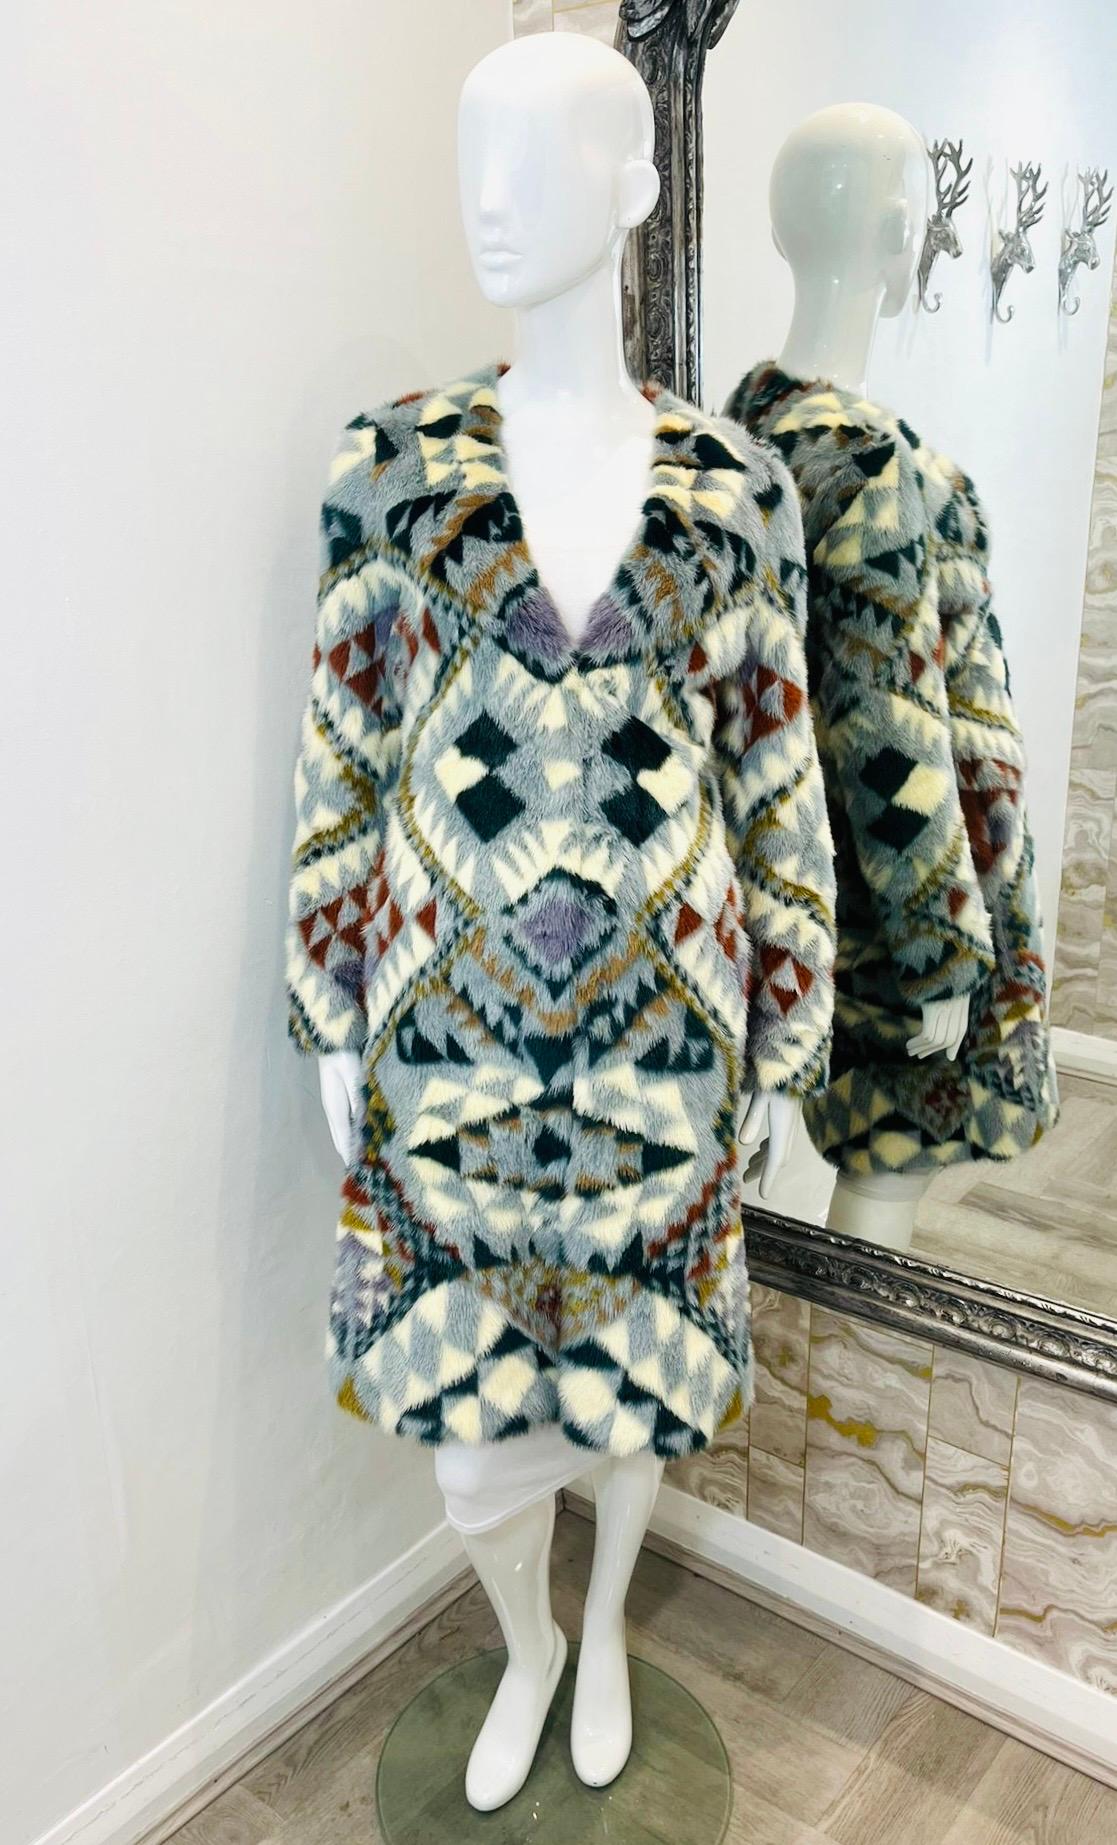 Yves Salomon Aztec Print Mink Fur Coat

Multicoloured fur styled with Aztec pattern in light shades of blue, purple, brown and yellow.

Featuring collarless design with long sleeves and above-the-knee length. Lined with silk.

Size – 34FR

Condition